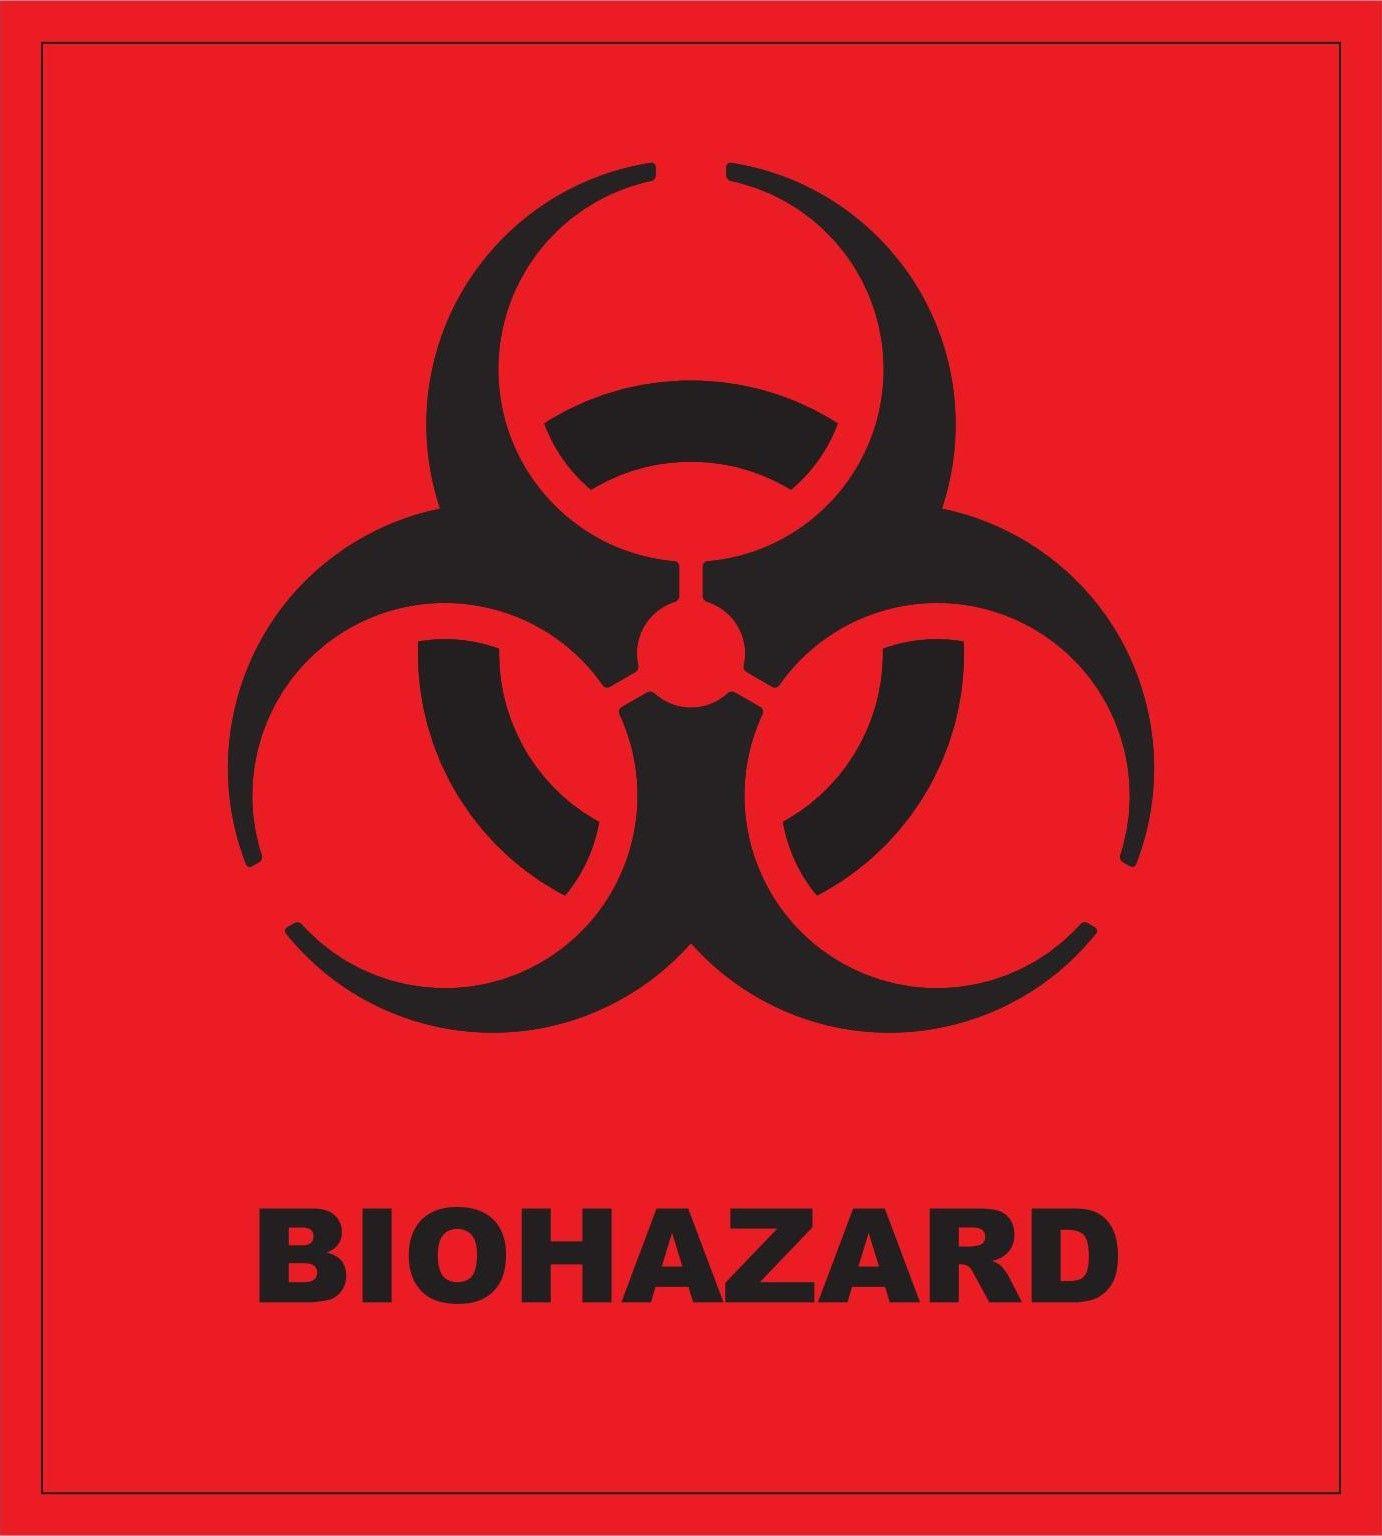 Biohazard Symbol And Text On Red. Universal Labels Logos